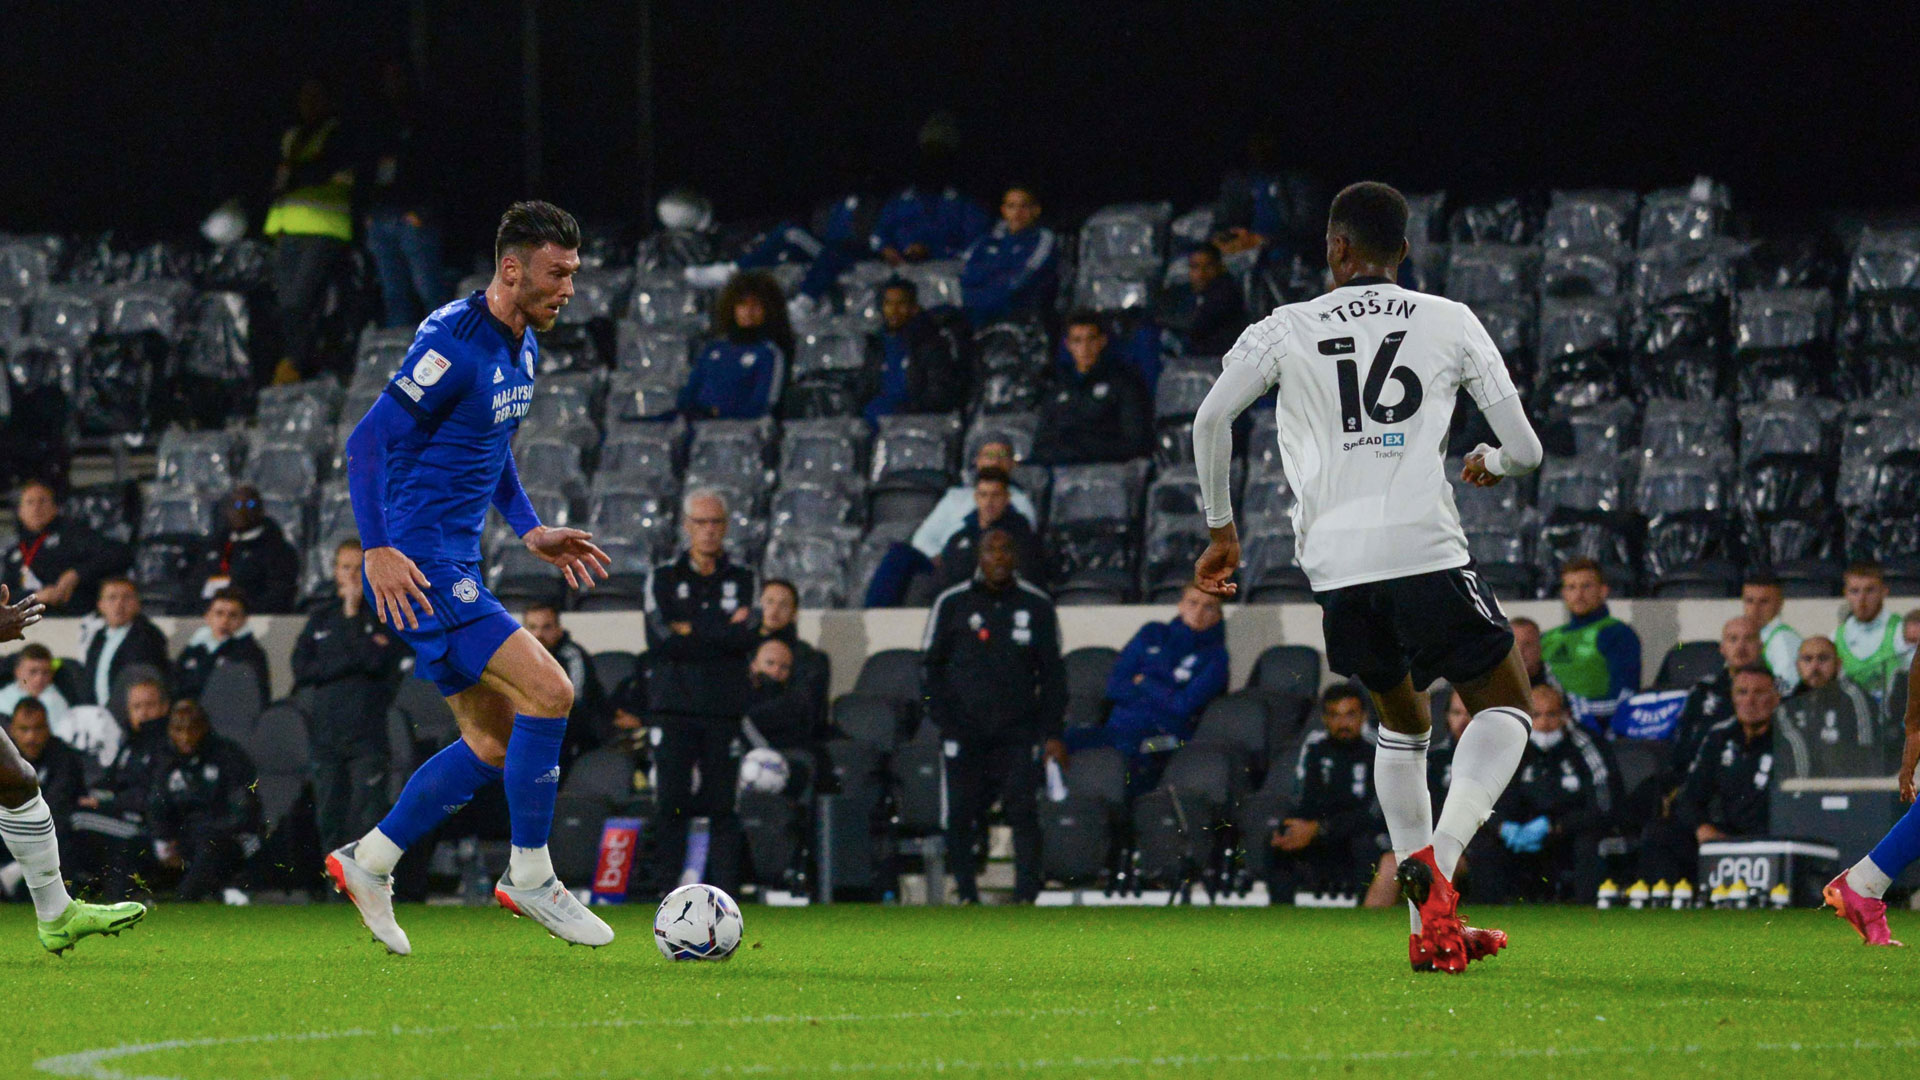 Kieffer Moore in action at Craven Cottage...